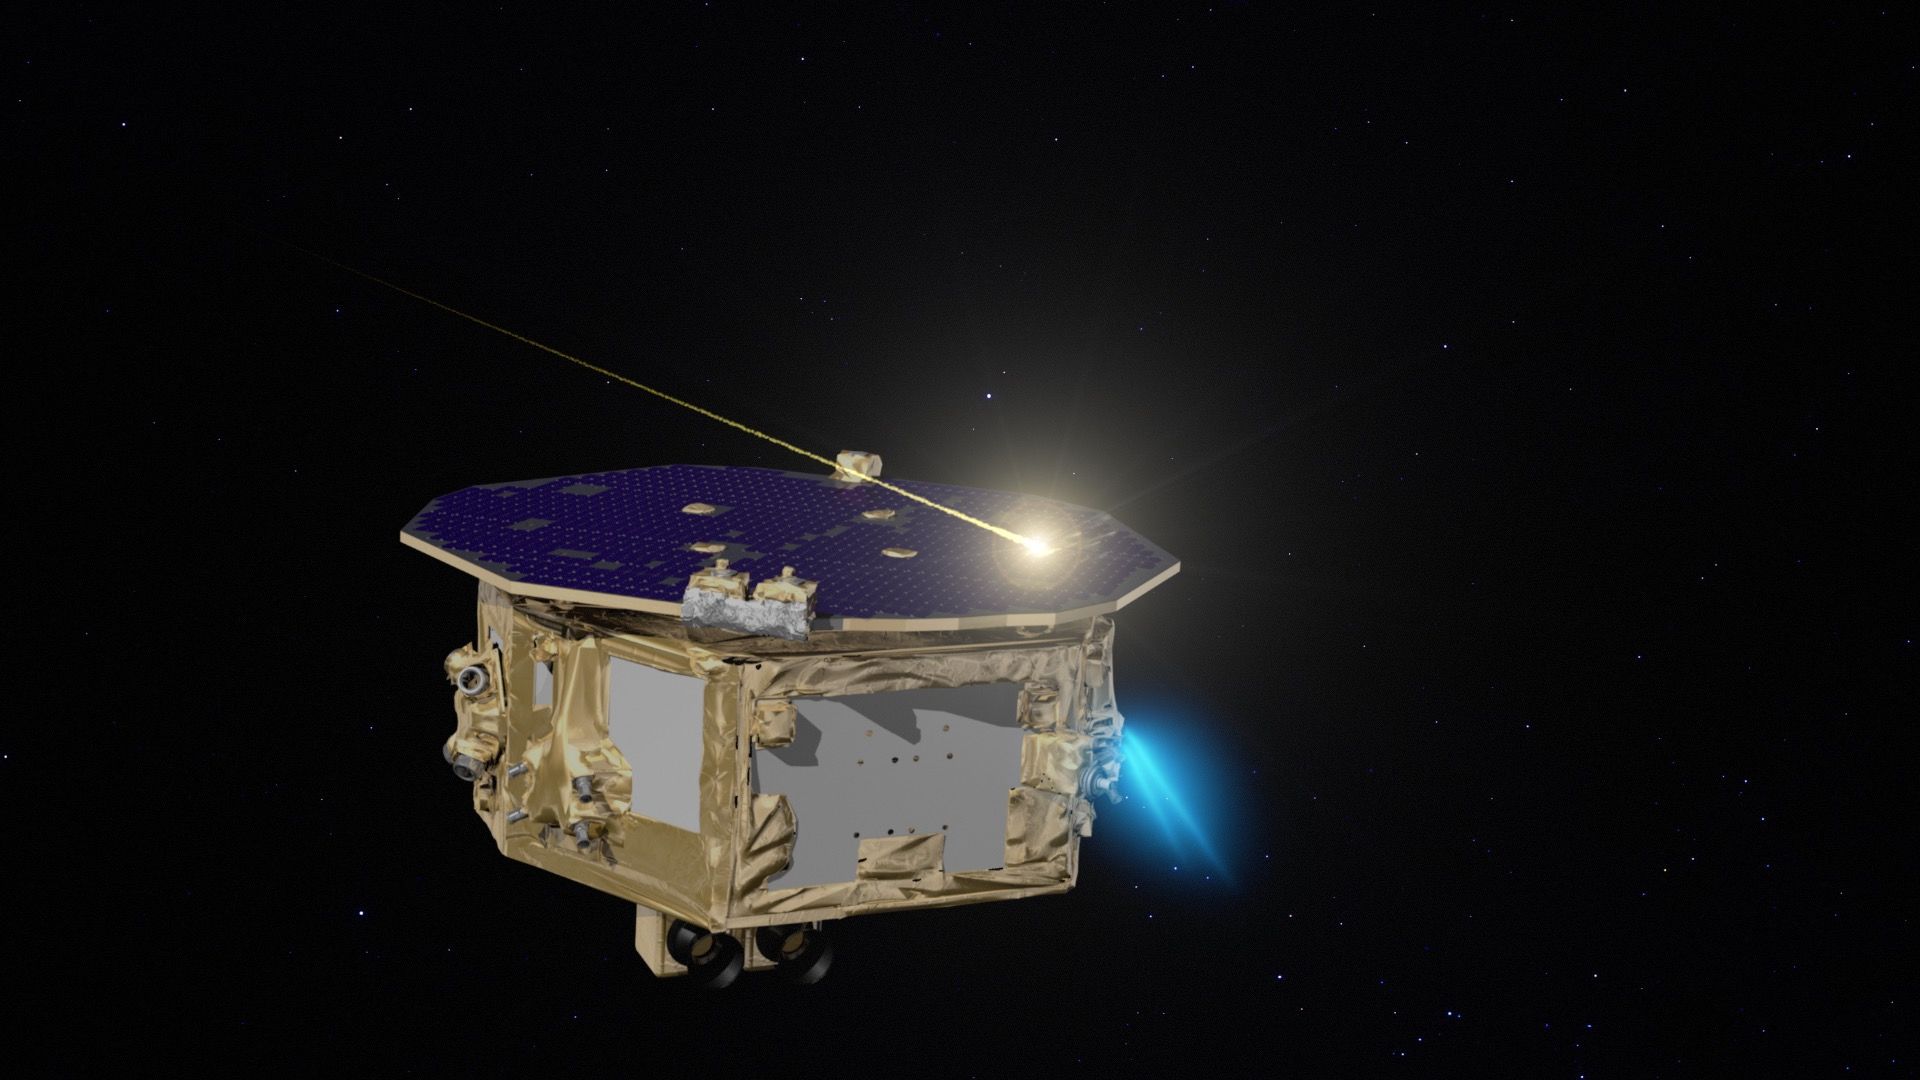 A somewhat fanciful depiction (there would be no trail in the vacuum of space) of a micrometeorite hitting the LISA Pathfinder spacecraft. Credit: NASA